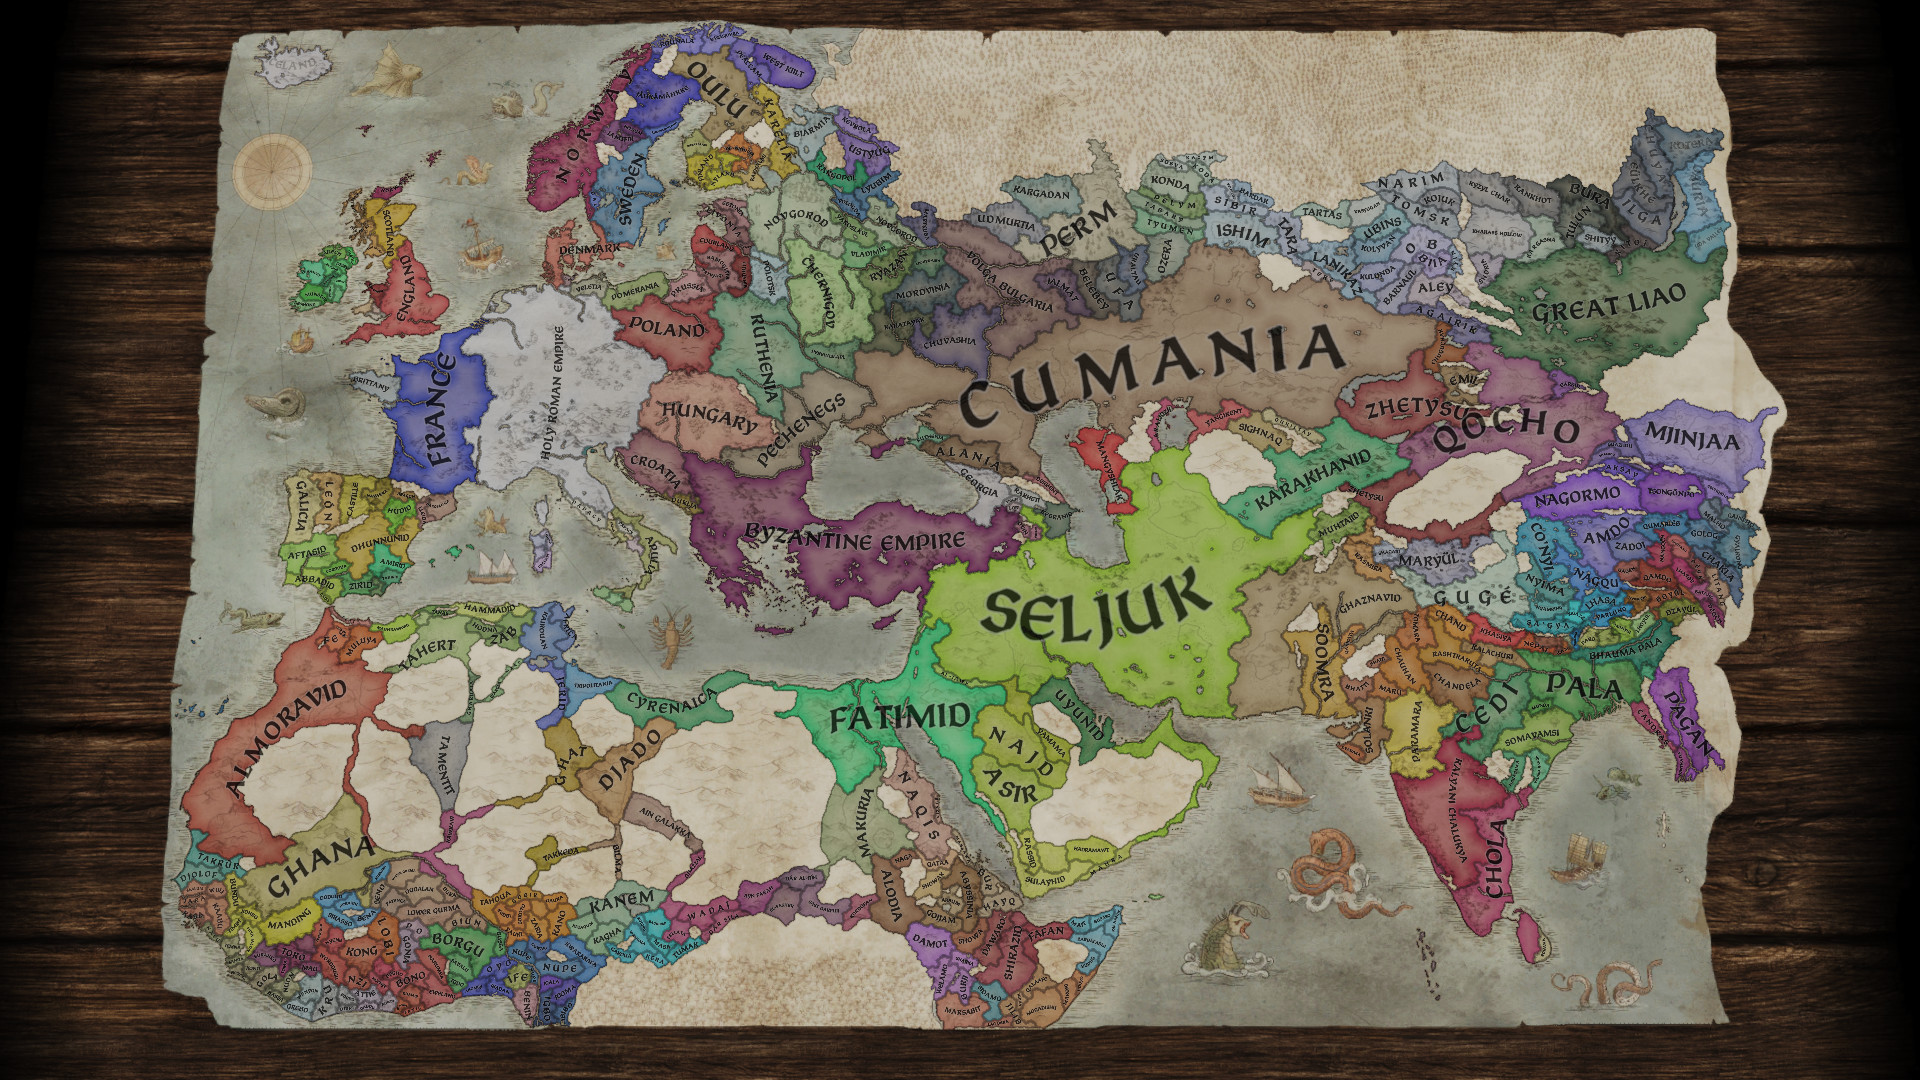 Crusader Kings III console edition is gold.